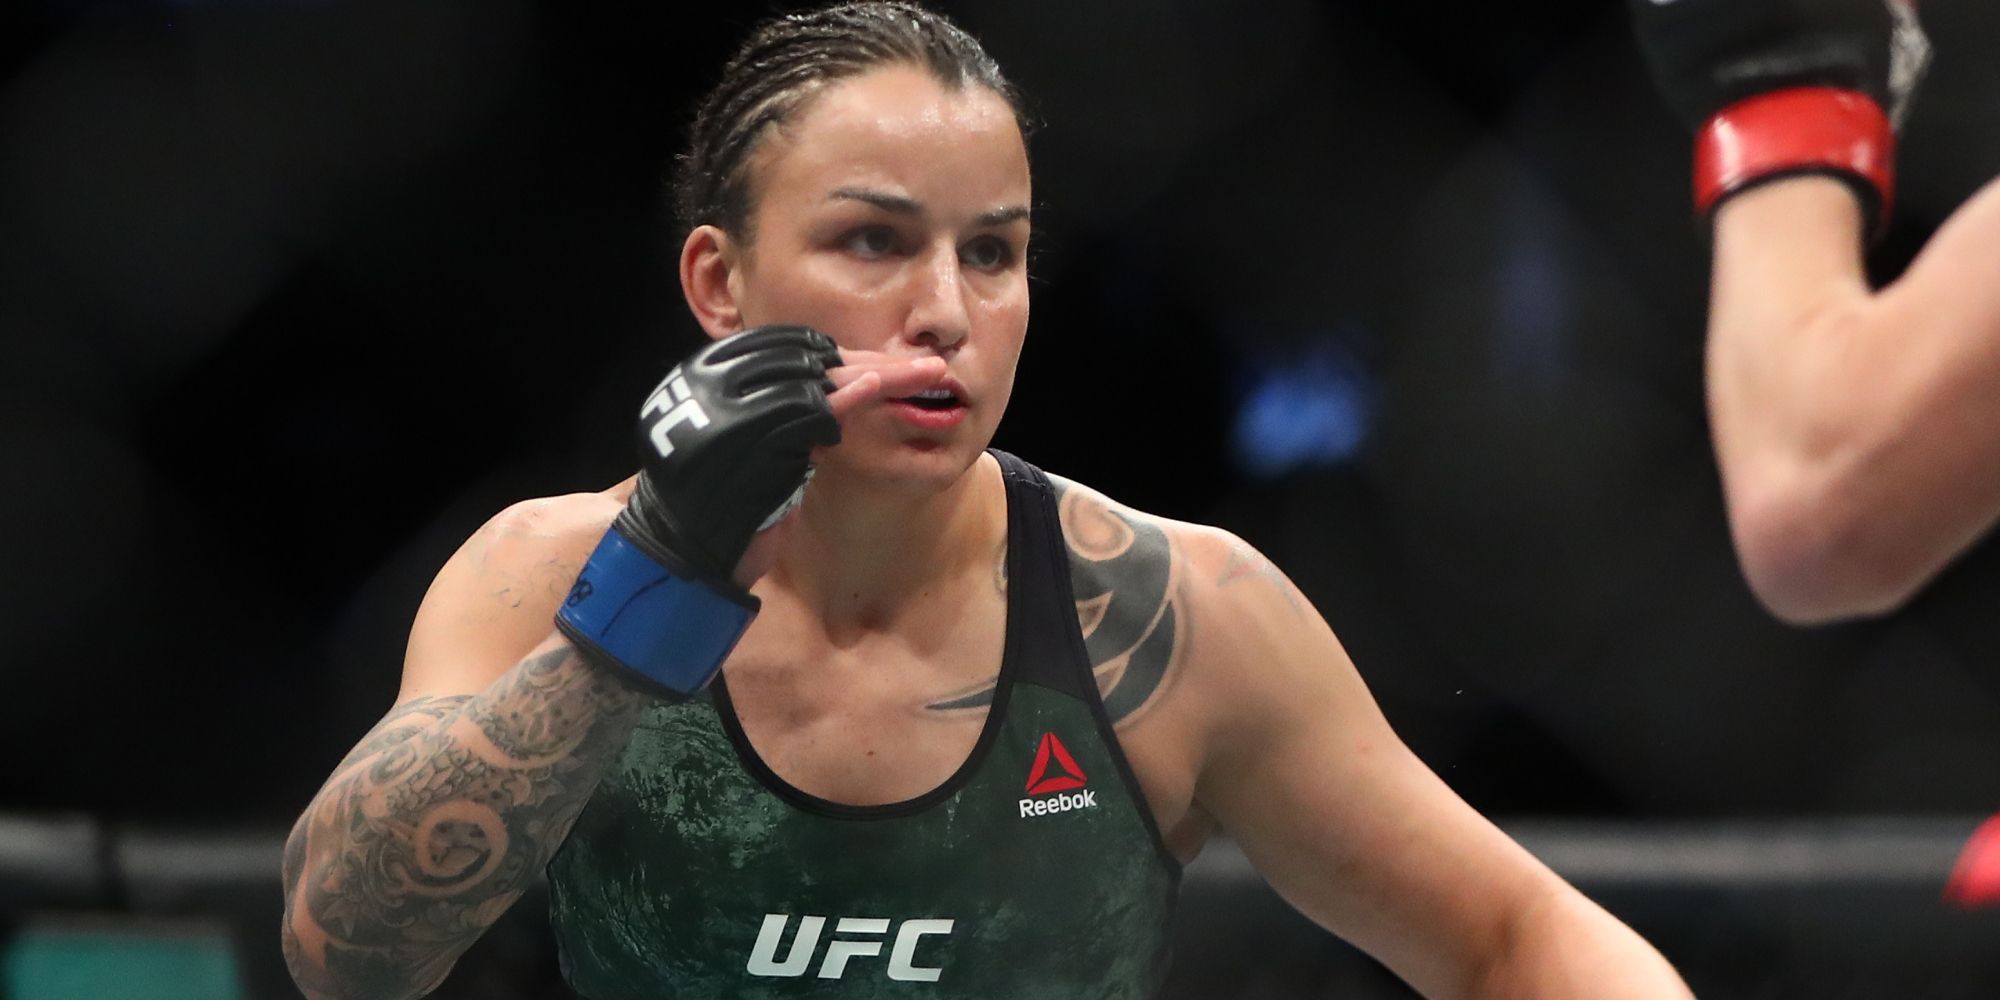 The 10 greatest UFC women's fighters of all-time ranked